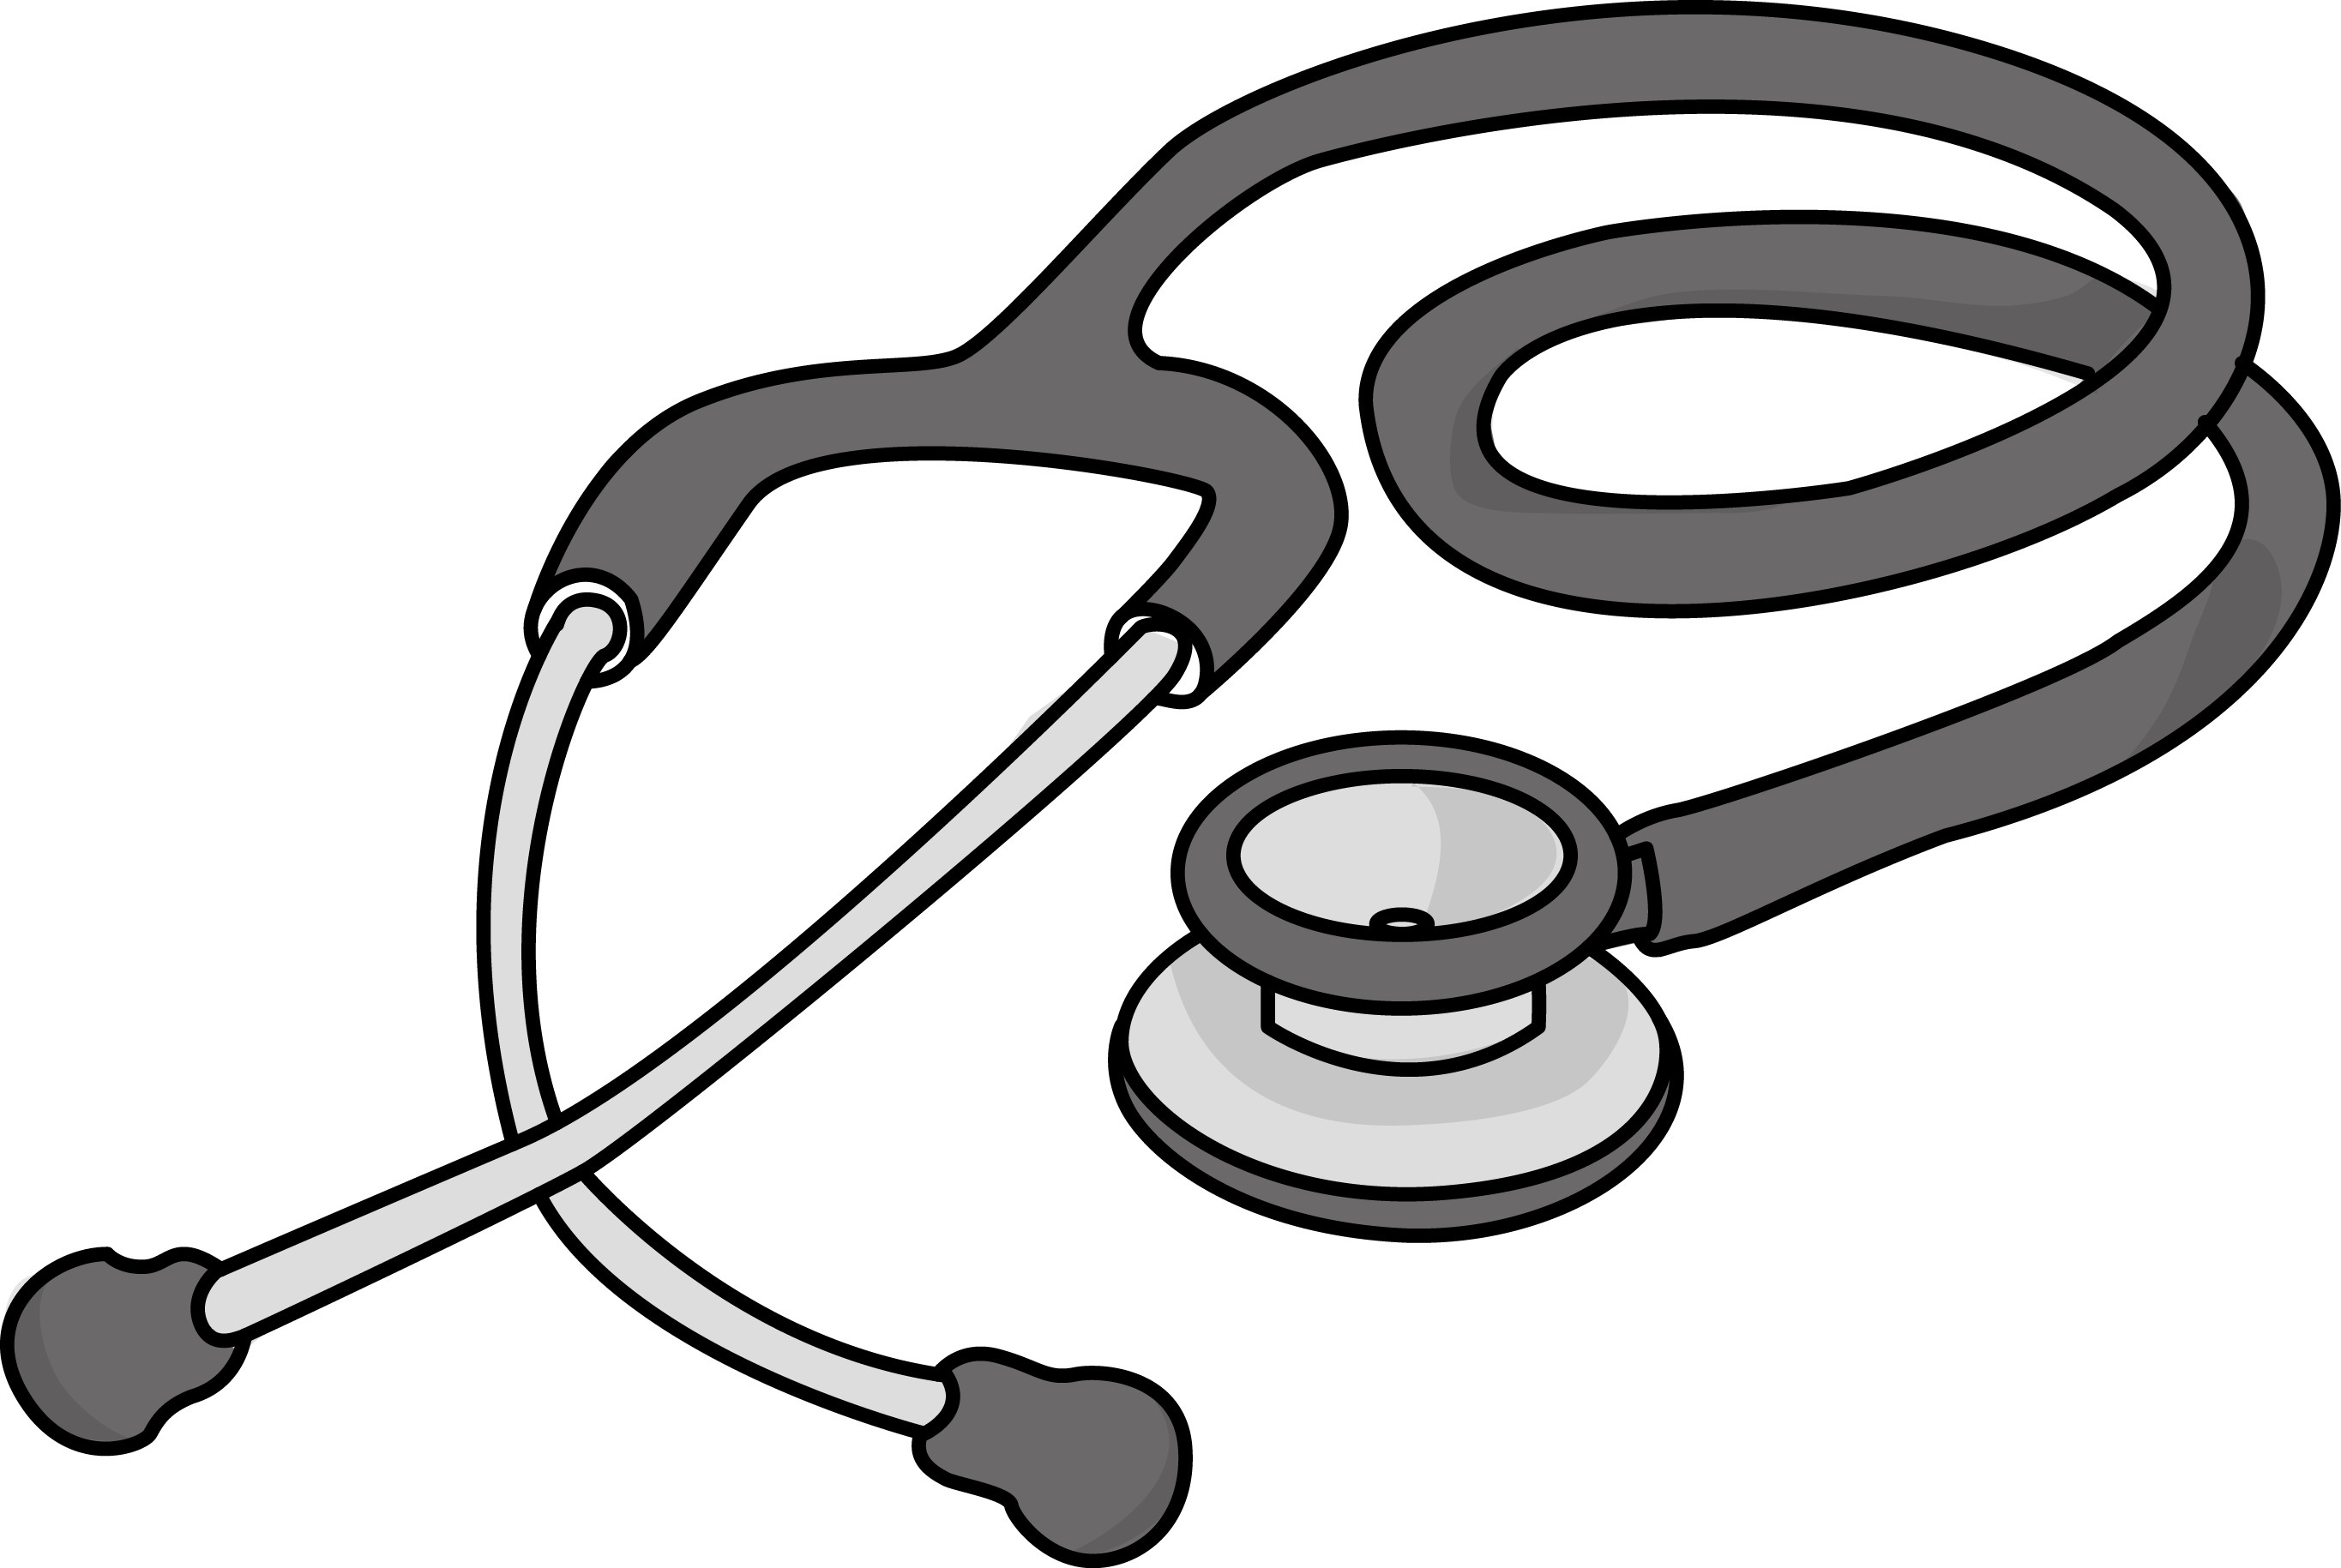 Image for free cardiology. Laws clipart weight